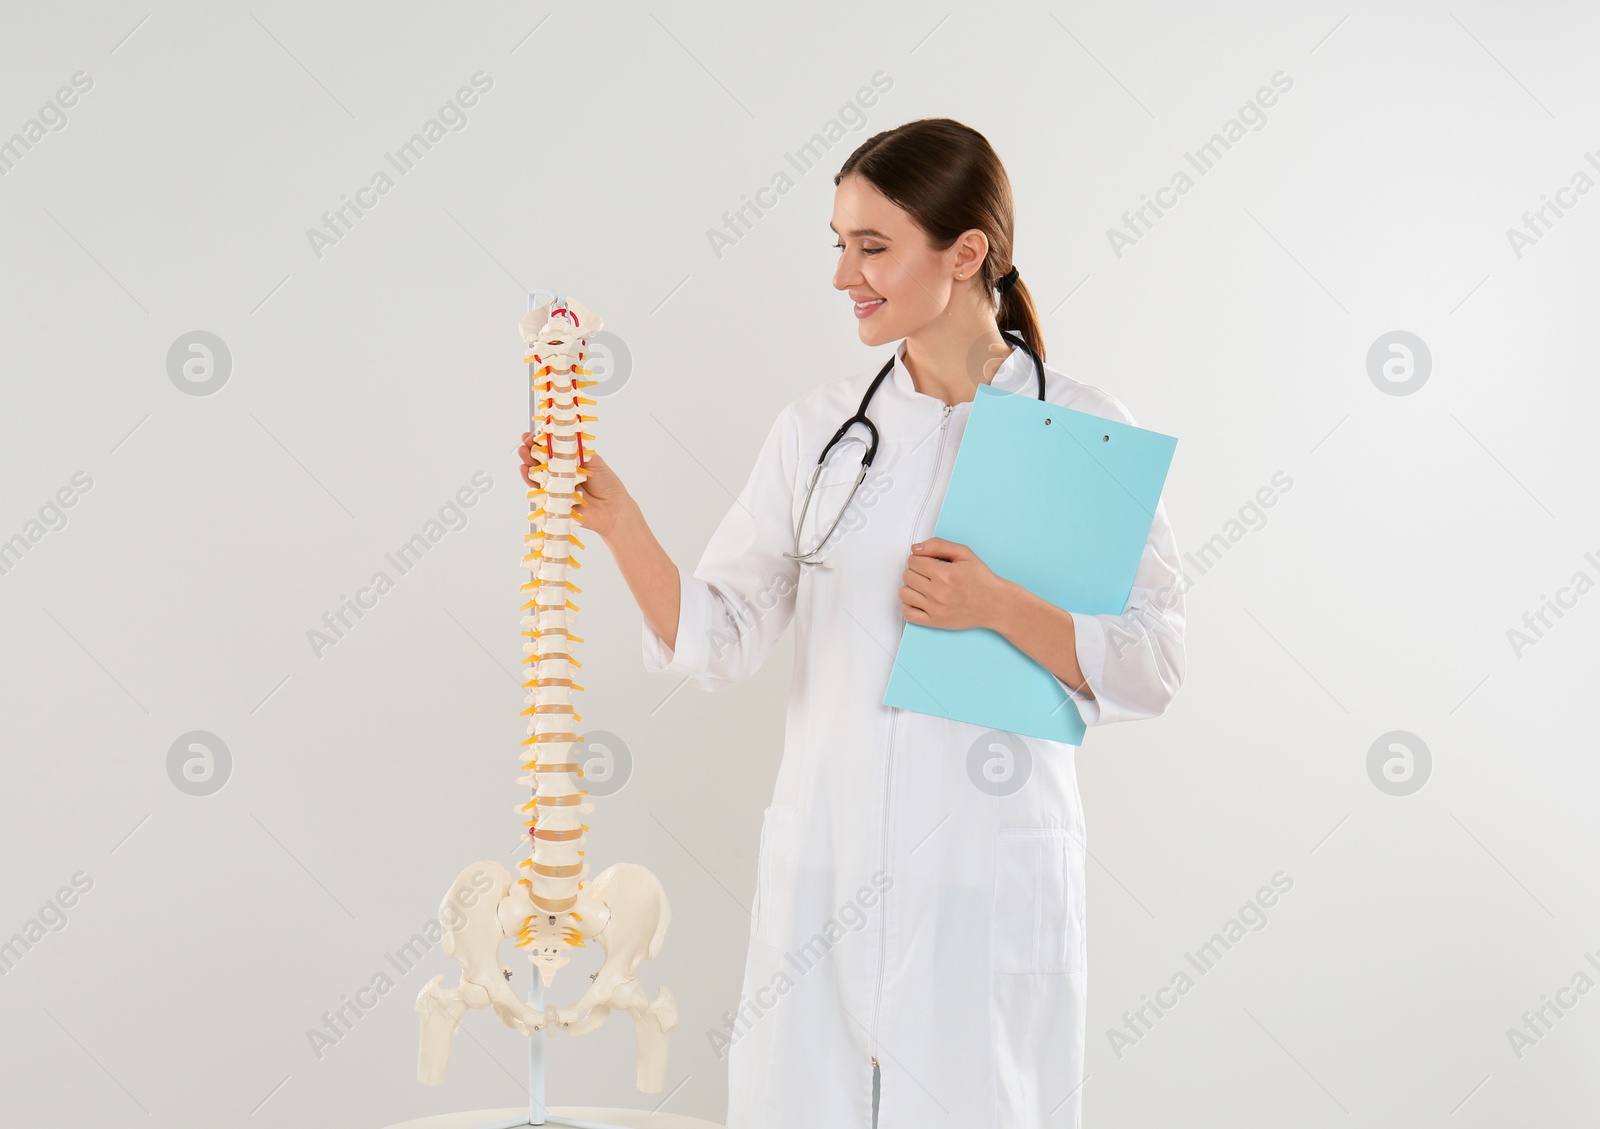 Photo of Female orthopedist with human spine model against light background